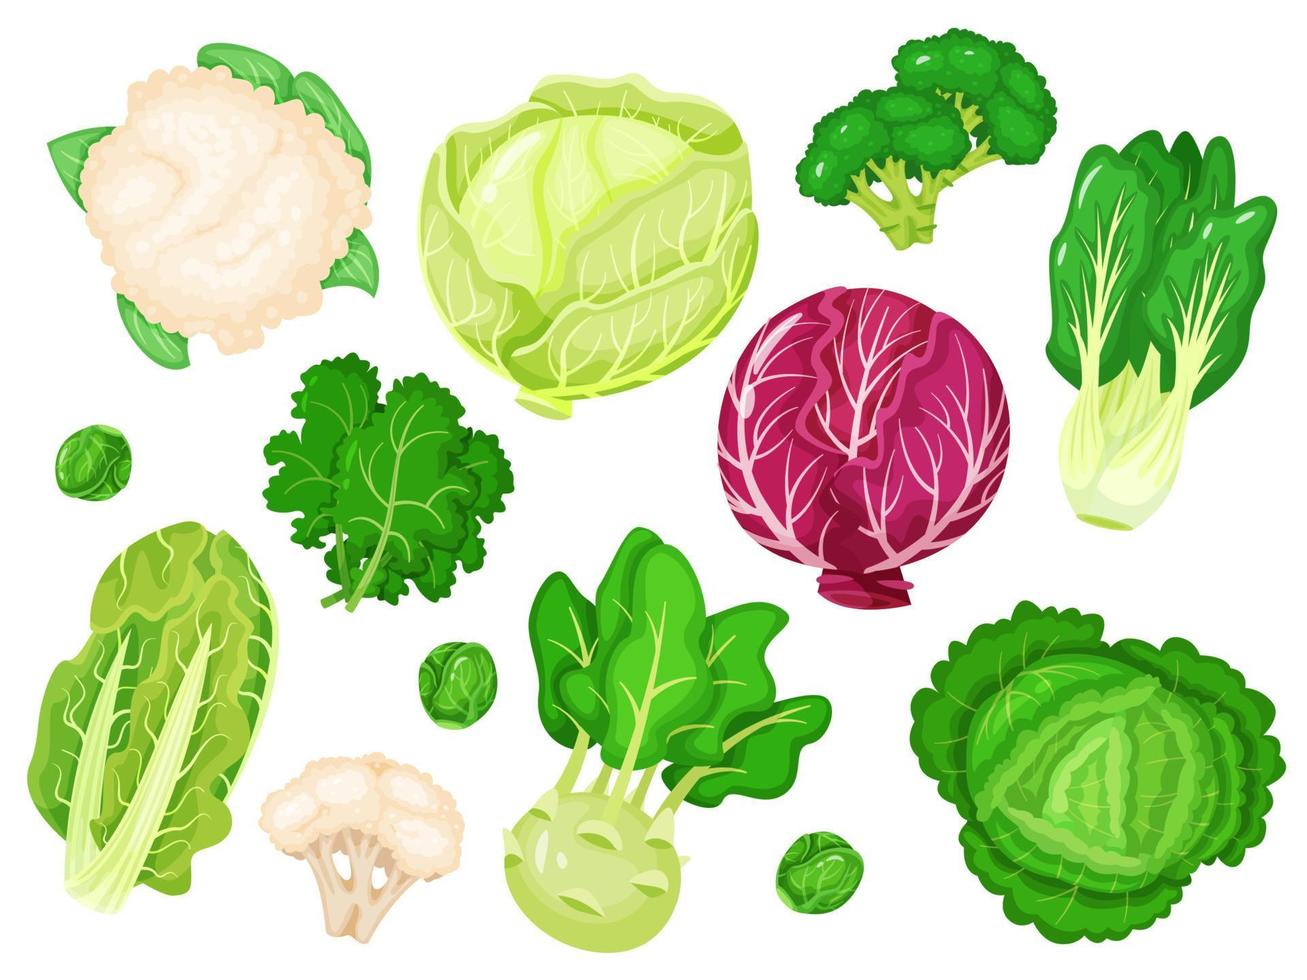 Cartoon cabbages. Fresh lettuce, broccoli, kale leaves, cauliflower, white and red cabbage. Various types of healthy green vegetables vector set